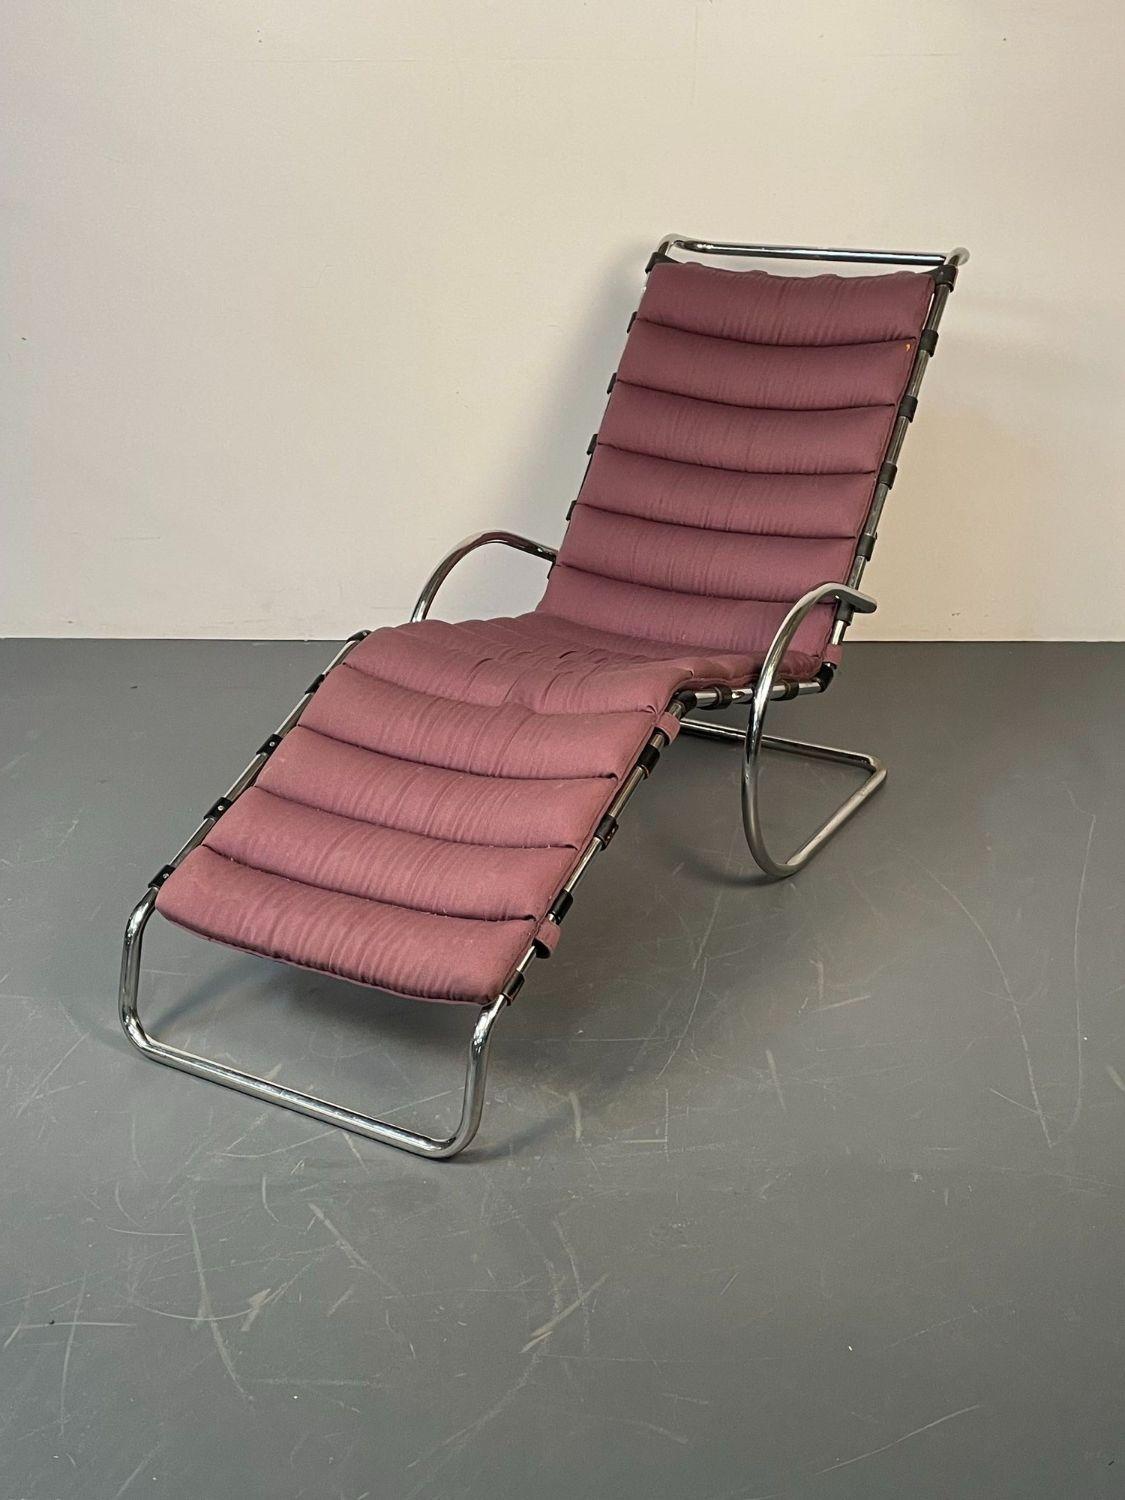 American Mid-Century Modern Chaise Lounge by Ludwig Mies Van Der Rohe for Knoll 
 
Early adjustable chaise lounge by Mies Van Der Rohe for Knoll. Maintaining it's original Knoll manufacturer label on the underside. All straps are attached and in